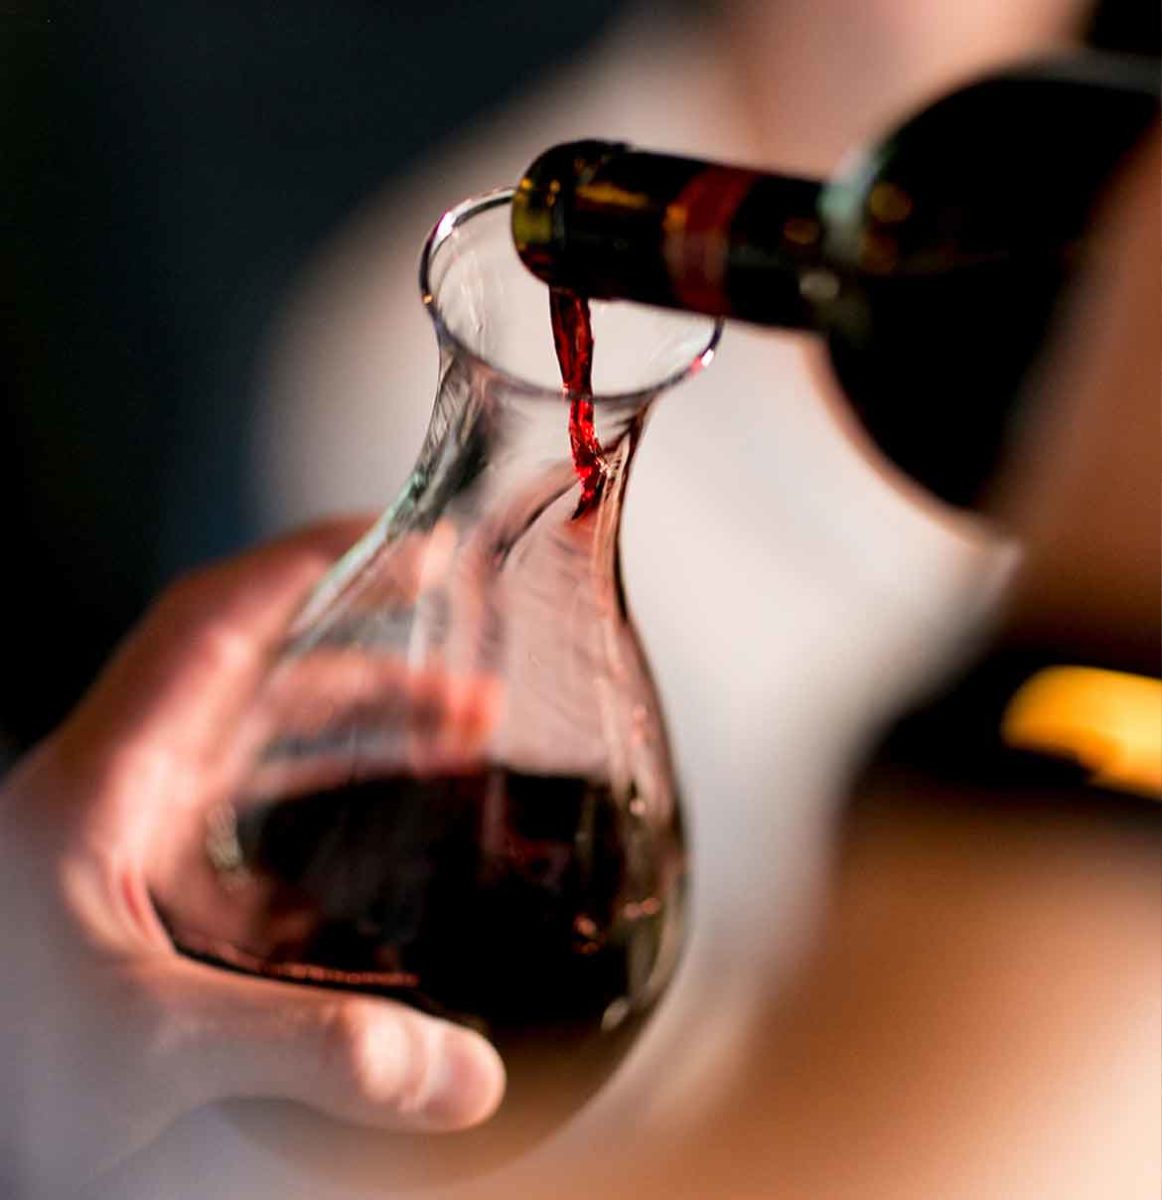 server pouring a bottle of red wine into decanter.